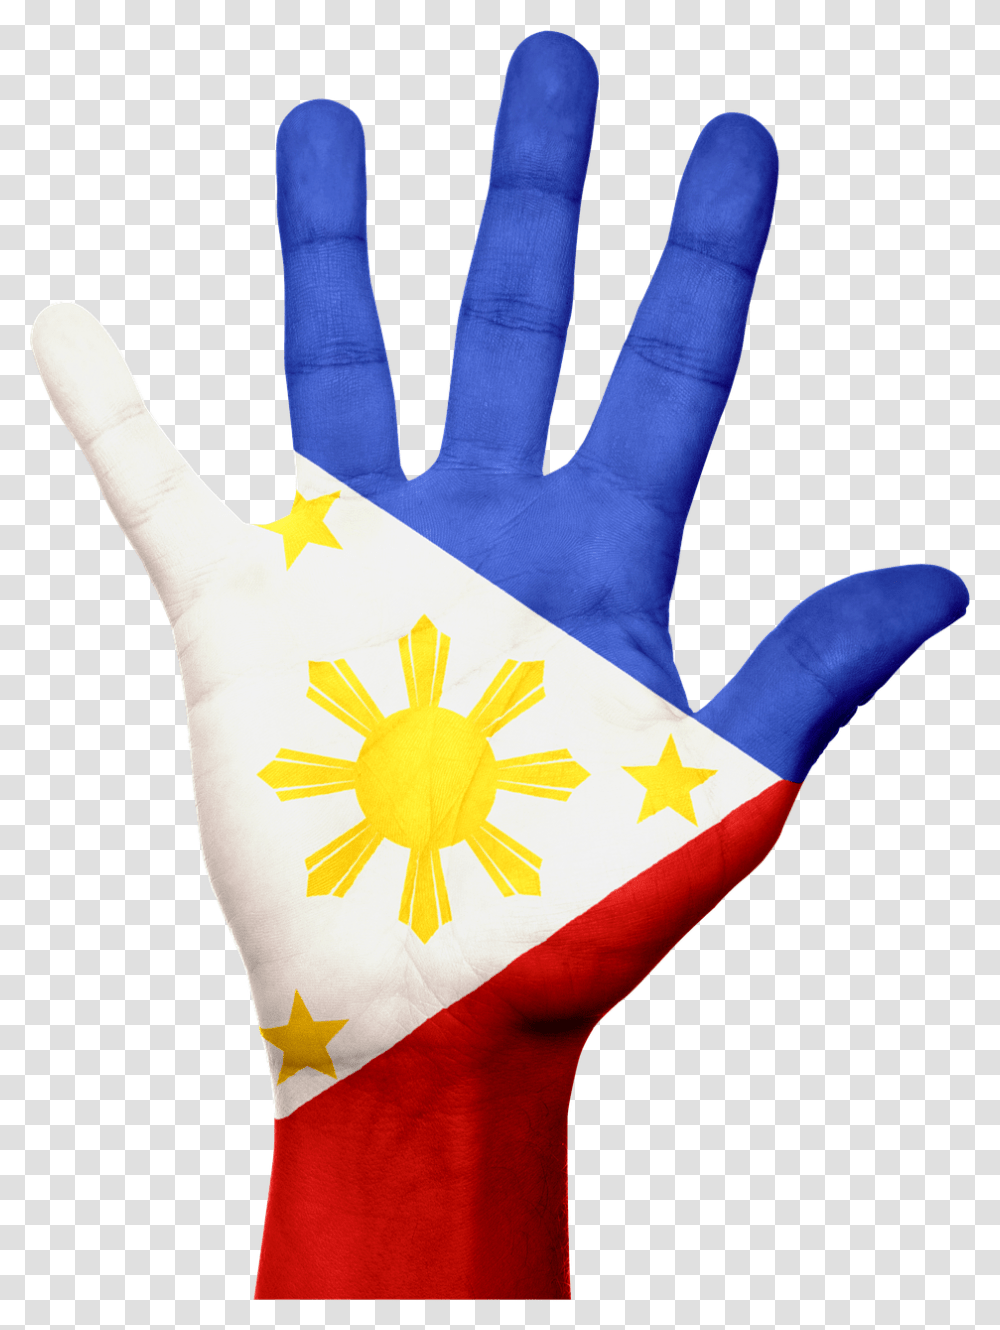 Interesting Facts About The Philippines Flag Pakistan Flag On Hand, Apparel, Finger, Glove Transparent Png